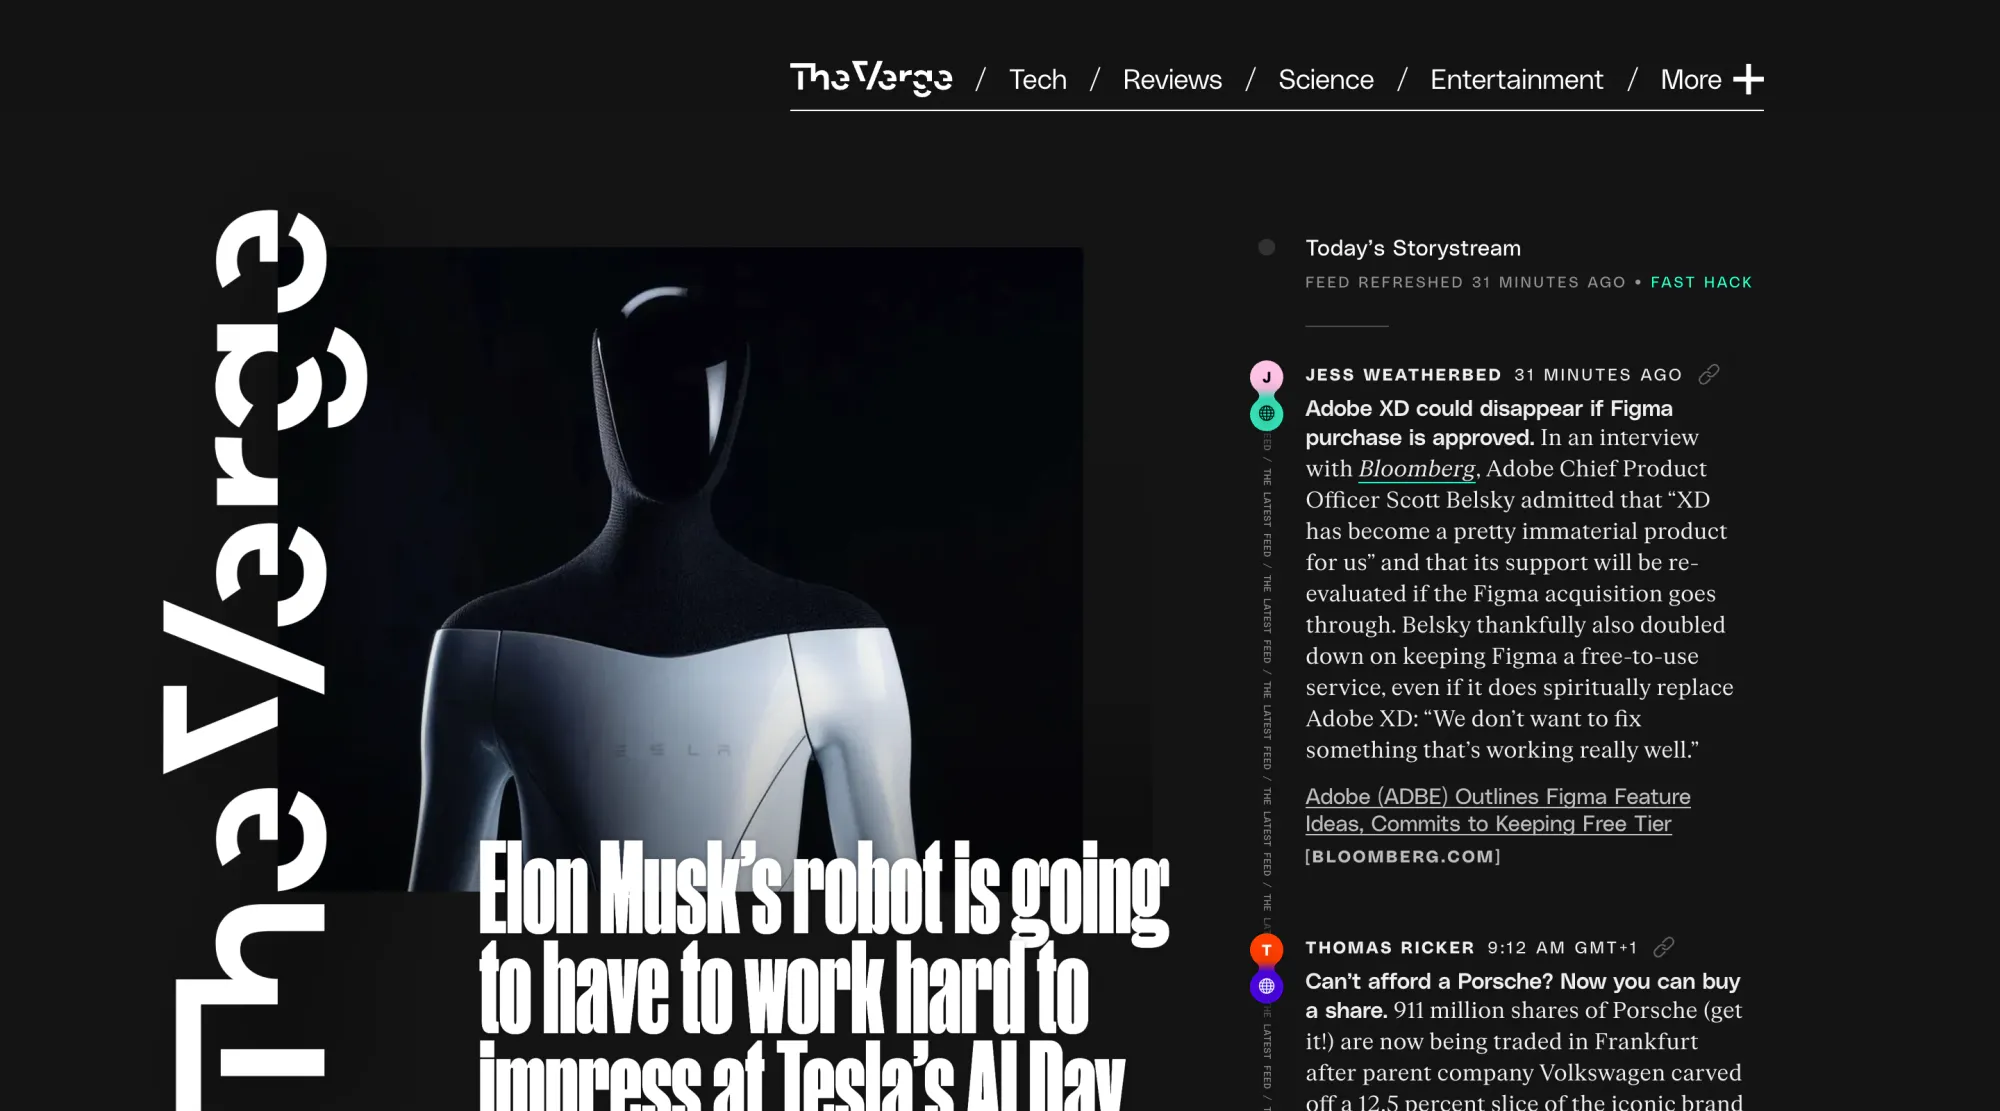 Major tech news site The Verge, built with Tailwind CSS